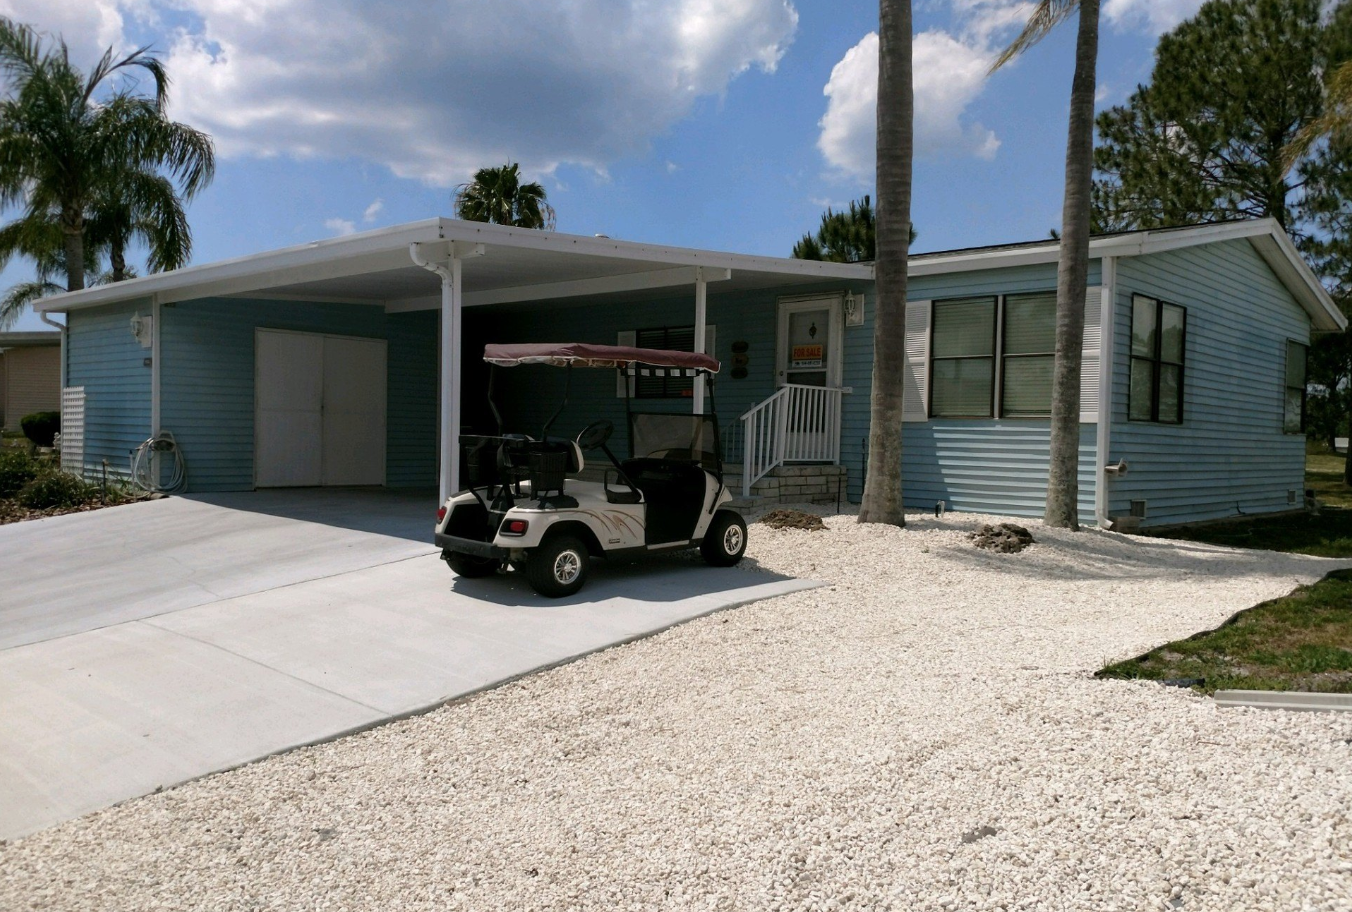 Do Mobile Home Park Rules Prevail Over State Law?